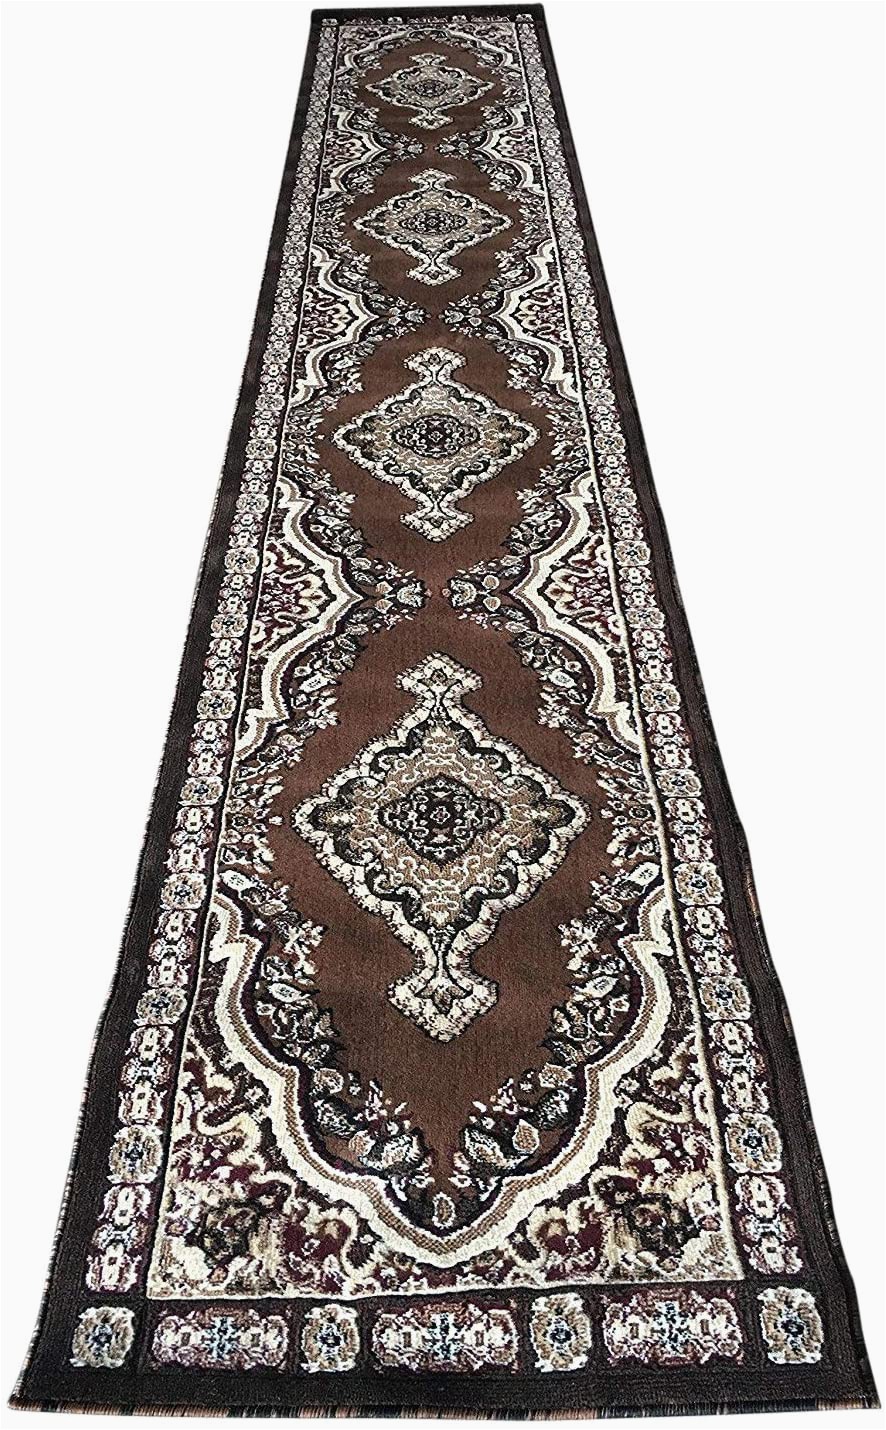 8 X 15 area Rug Emirates Traditional Long Runner Persian area Rug Brown Burgundy Black Beige Design 520 31 Inch X15 Feet 8 Inch